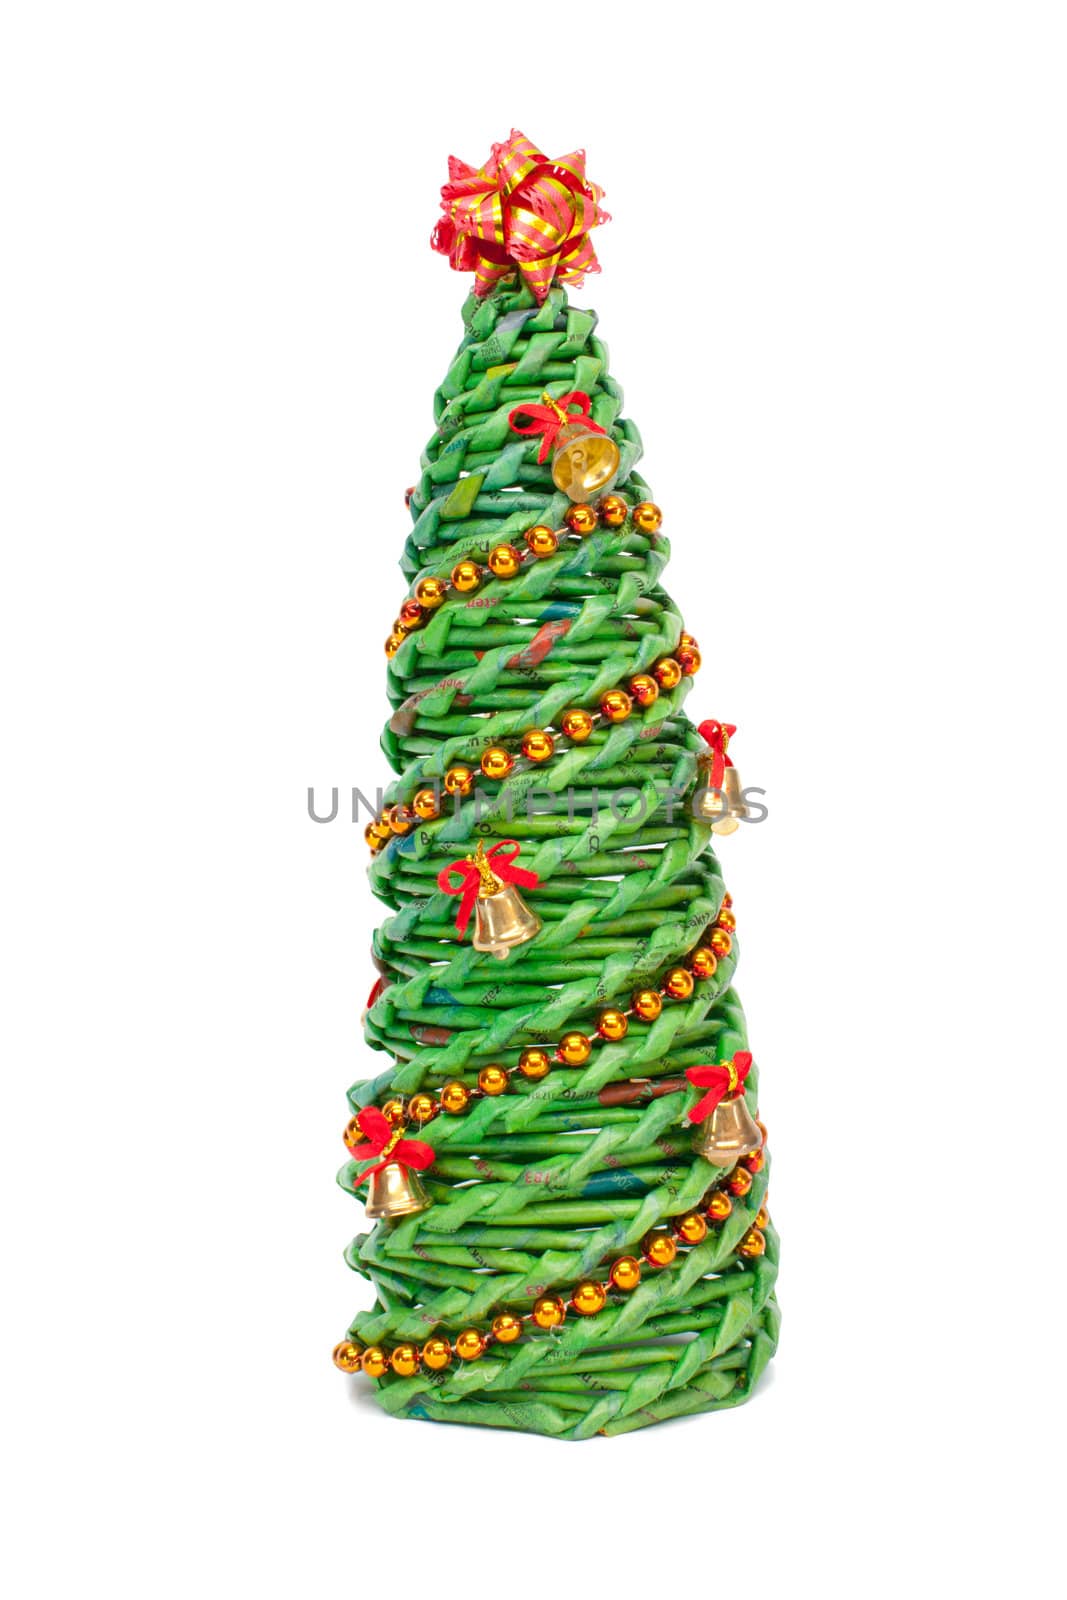 Knitted Christmas tree by LiborF